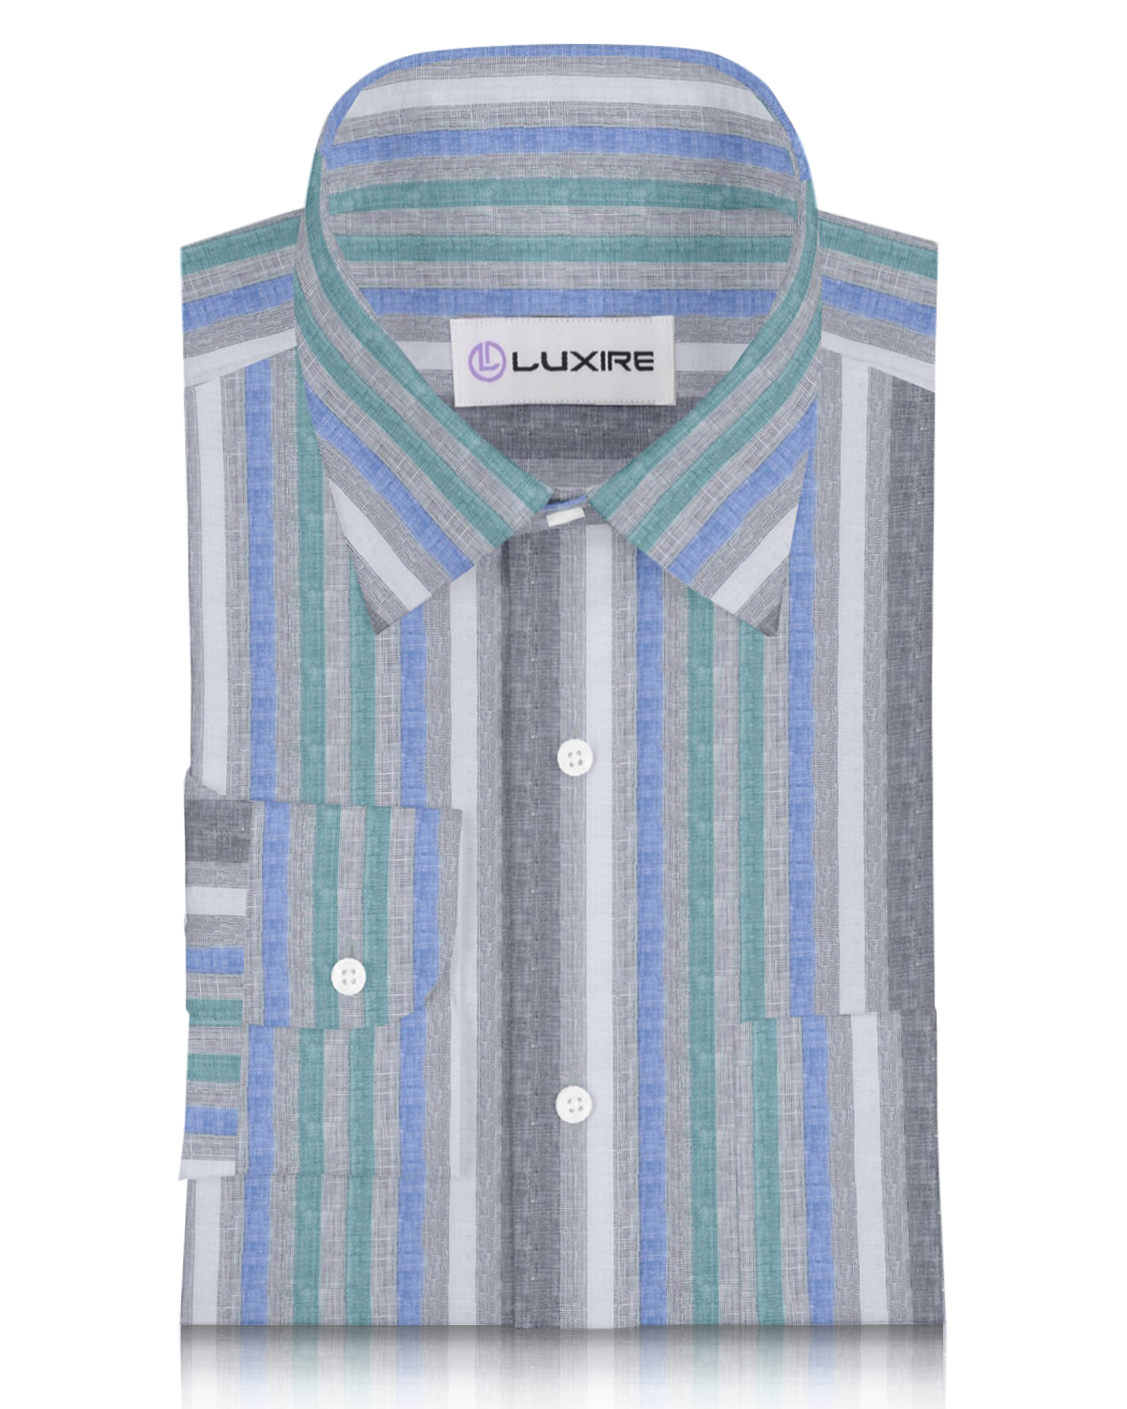 Front of custom linen shirt for men in green blue and white stripes by Luxire Clothing